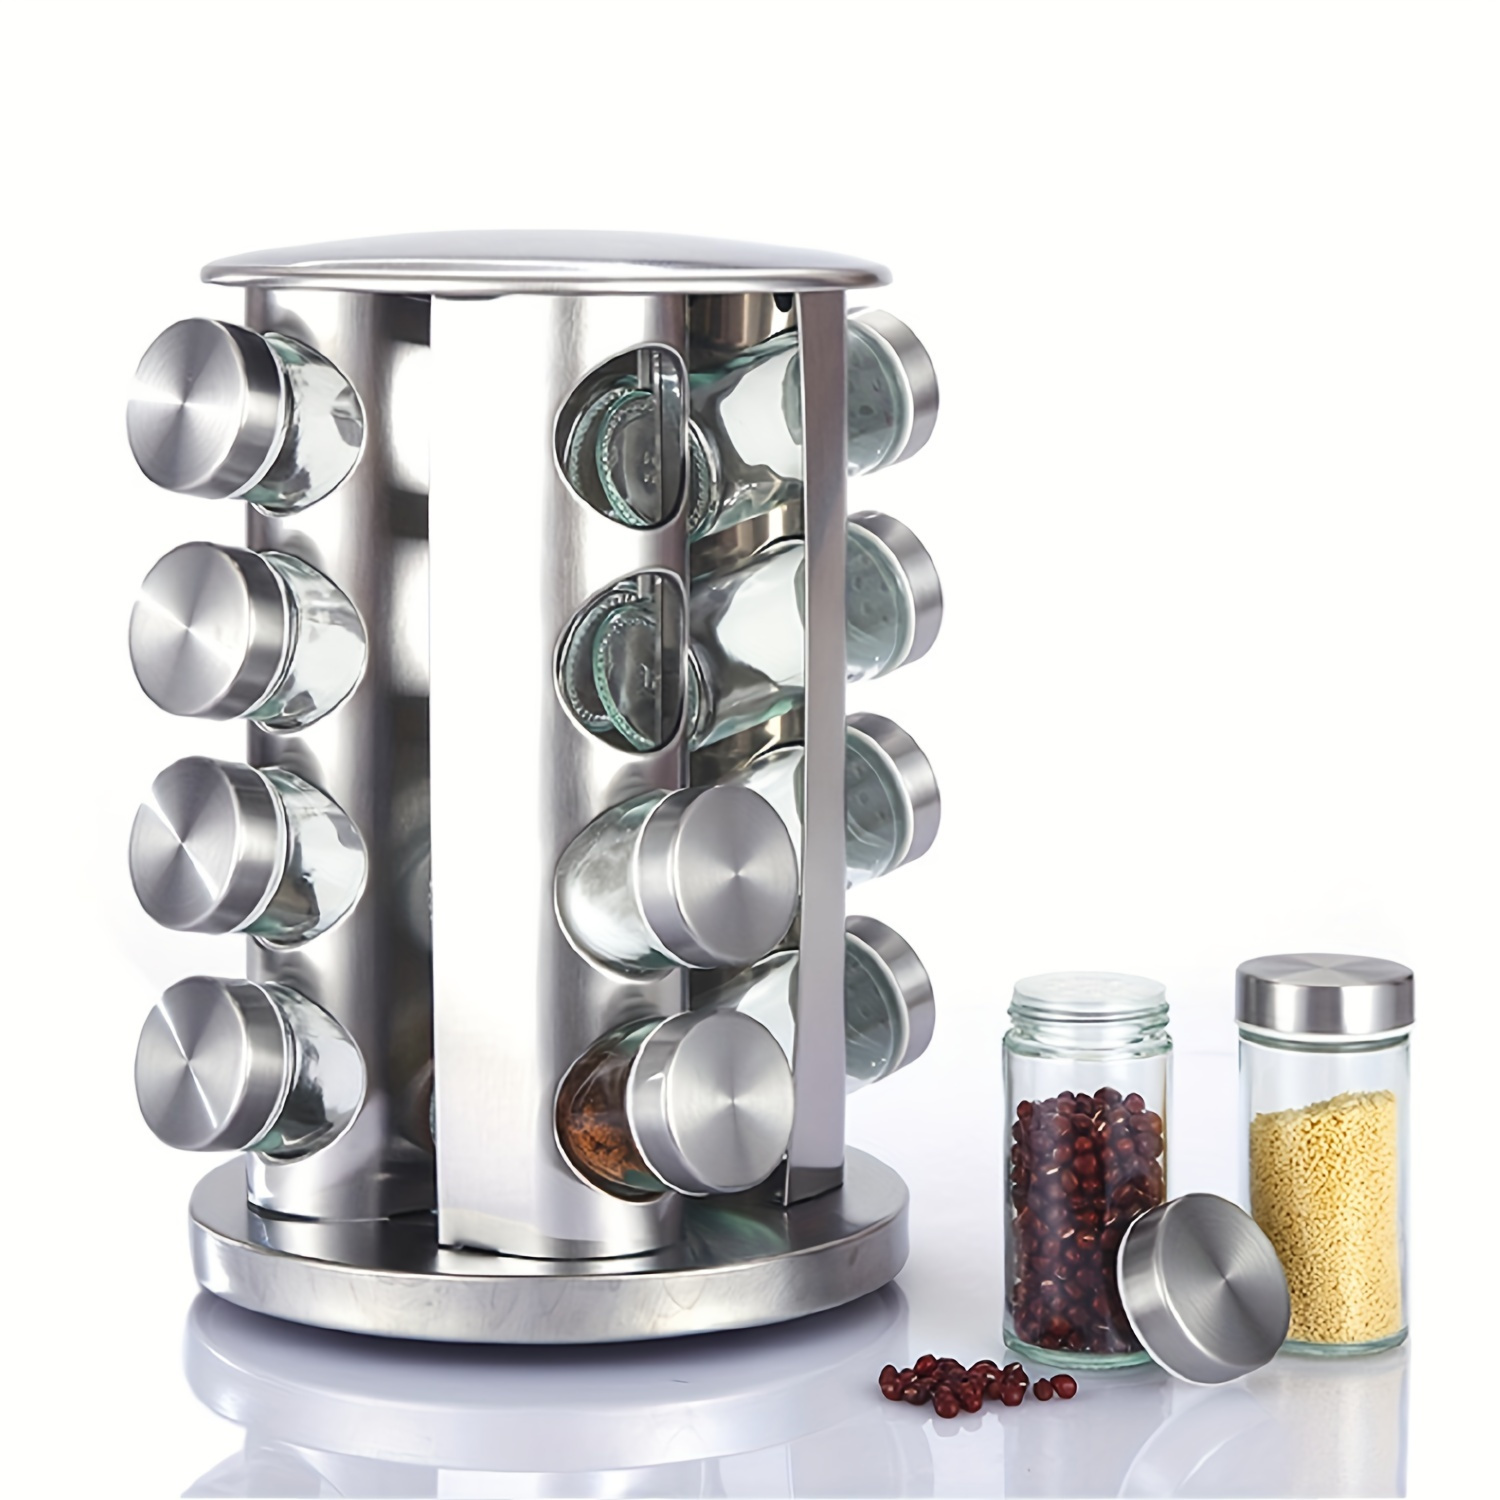 

1 Set, Spice Rack, Rotating Spice Rack With 8/12/16 Jars, Revolving Spice Rack Organizer For Cabinet, Seasoning Organizer, Stainless Steel Kitchen Spice Tower, Kitchen Tools